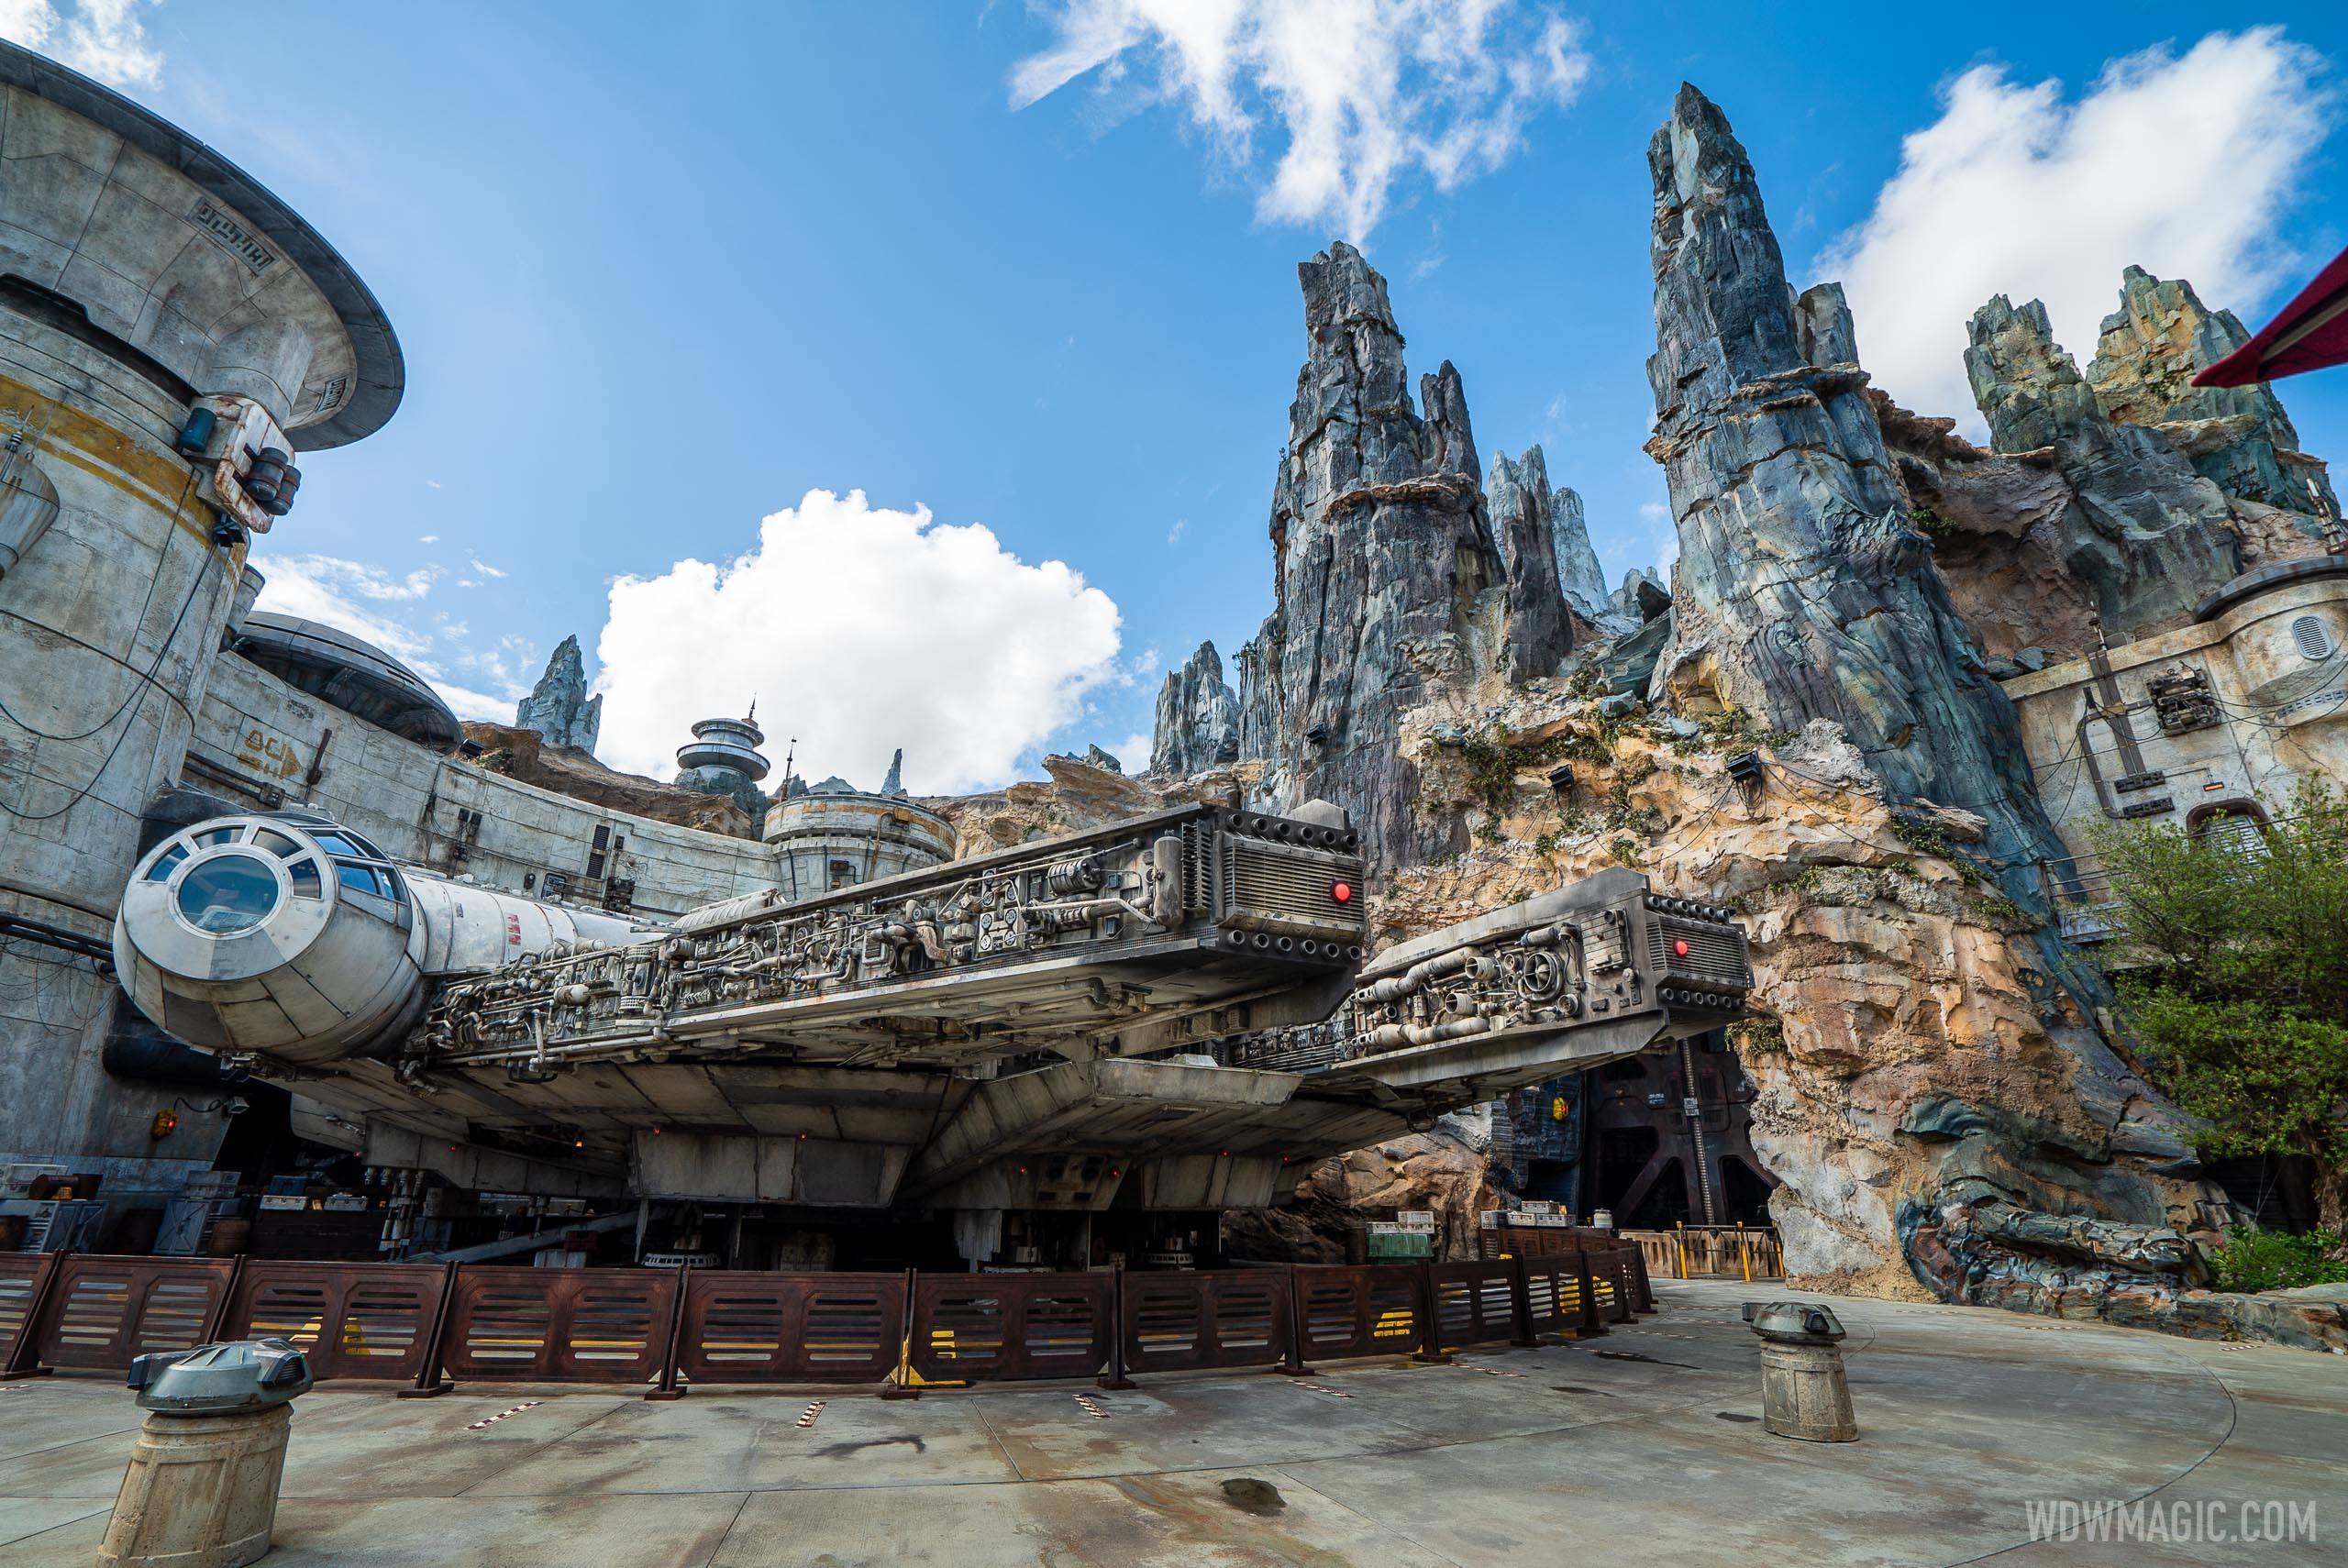 Star Wars: Galaxy's Edge will be part of the new Disney+ behind-the-scenes series